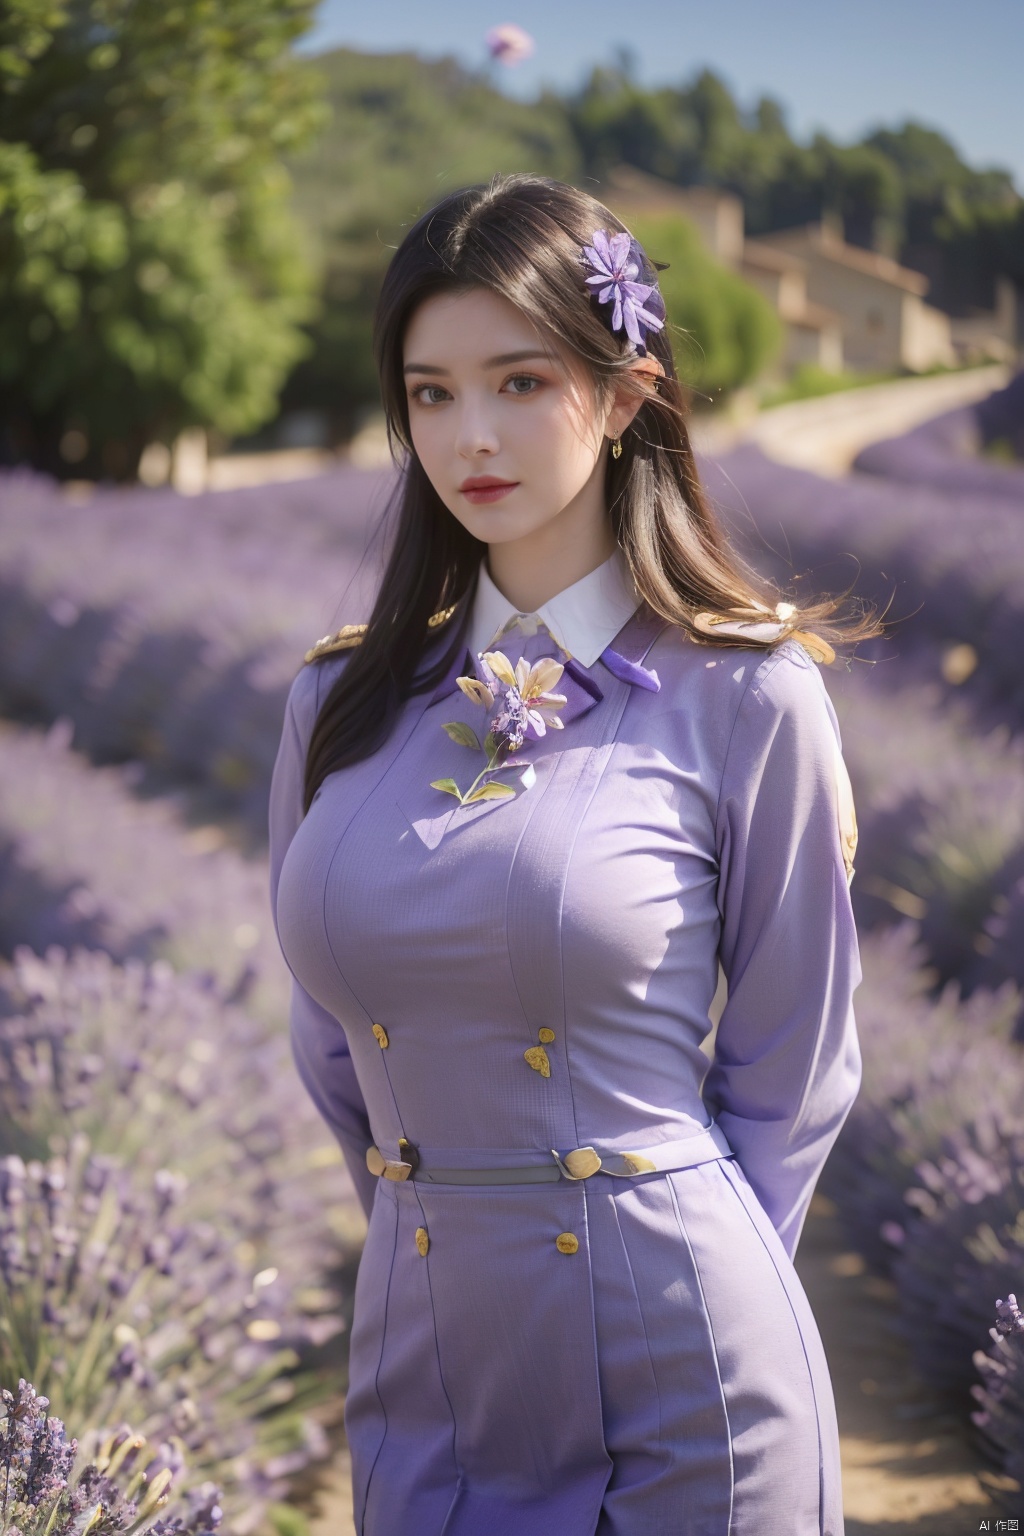  (Realistic), masterpiece, best quality, cinematic lighting, natural shadows, highest detail, looking at the audience,1 girl, cute girl photo, faint smile, charming, 25 years old, flip hair. With side light, (red stewardess uniform:1.39), dynamic modeling,(big breasts:1.59),(Lavender flowers in Provence, France:1.59)